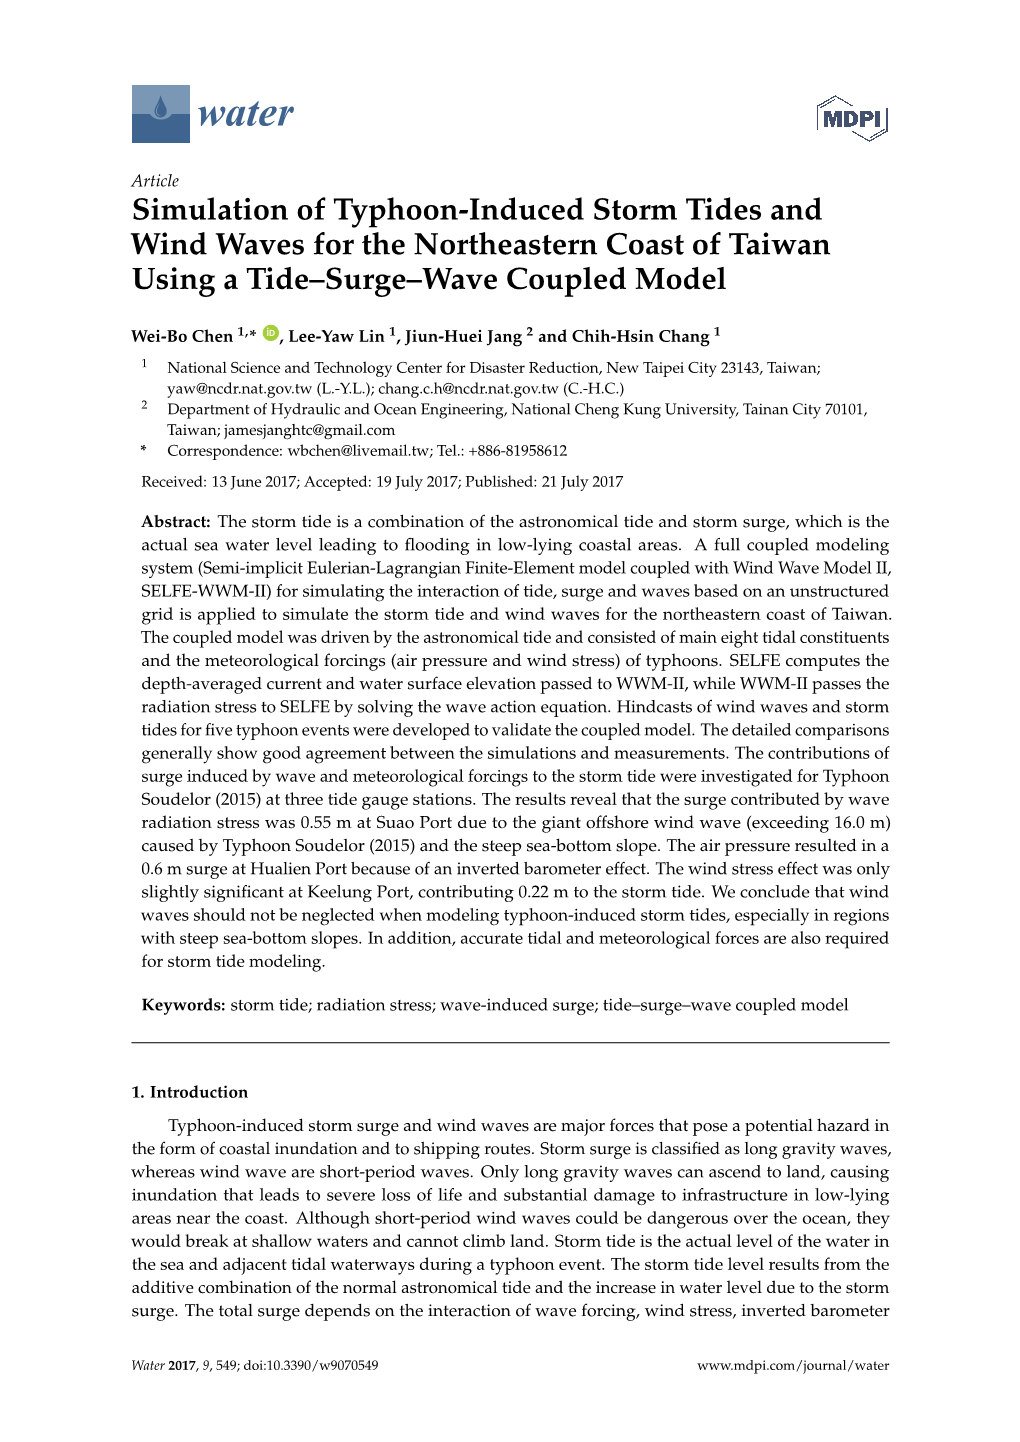 Simulation of Typhoon-Induced Storm Tides and Wind Waves for the Northeastern Coast of Taiwan Using a Tide–Surge–Wave Coupled Model